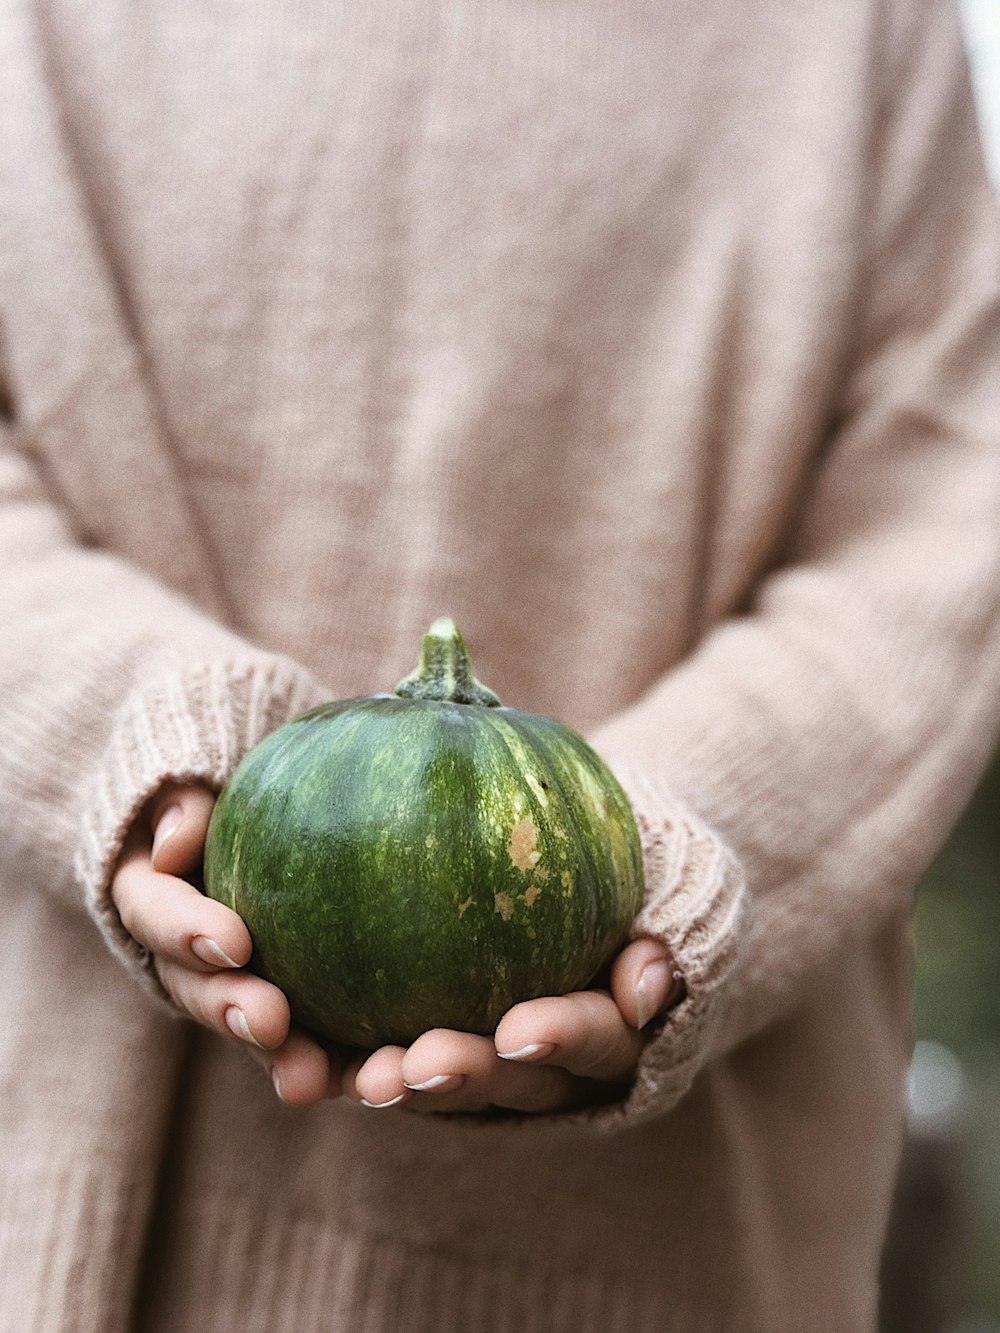 person holding green round fruit